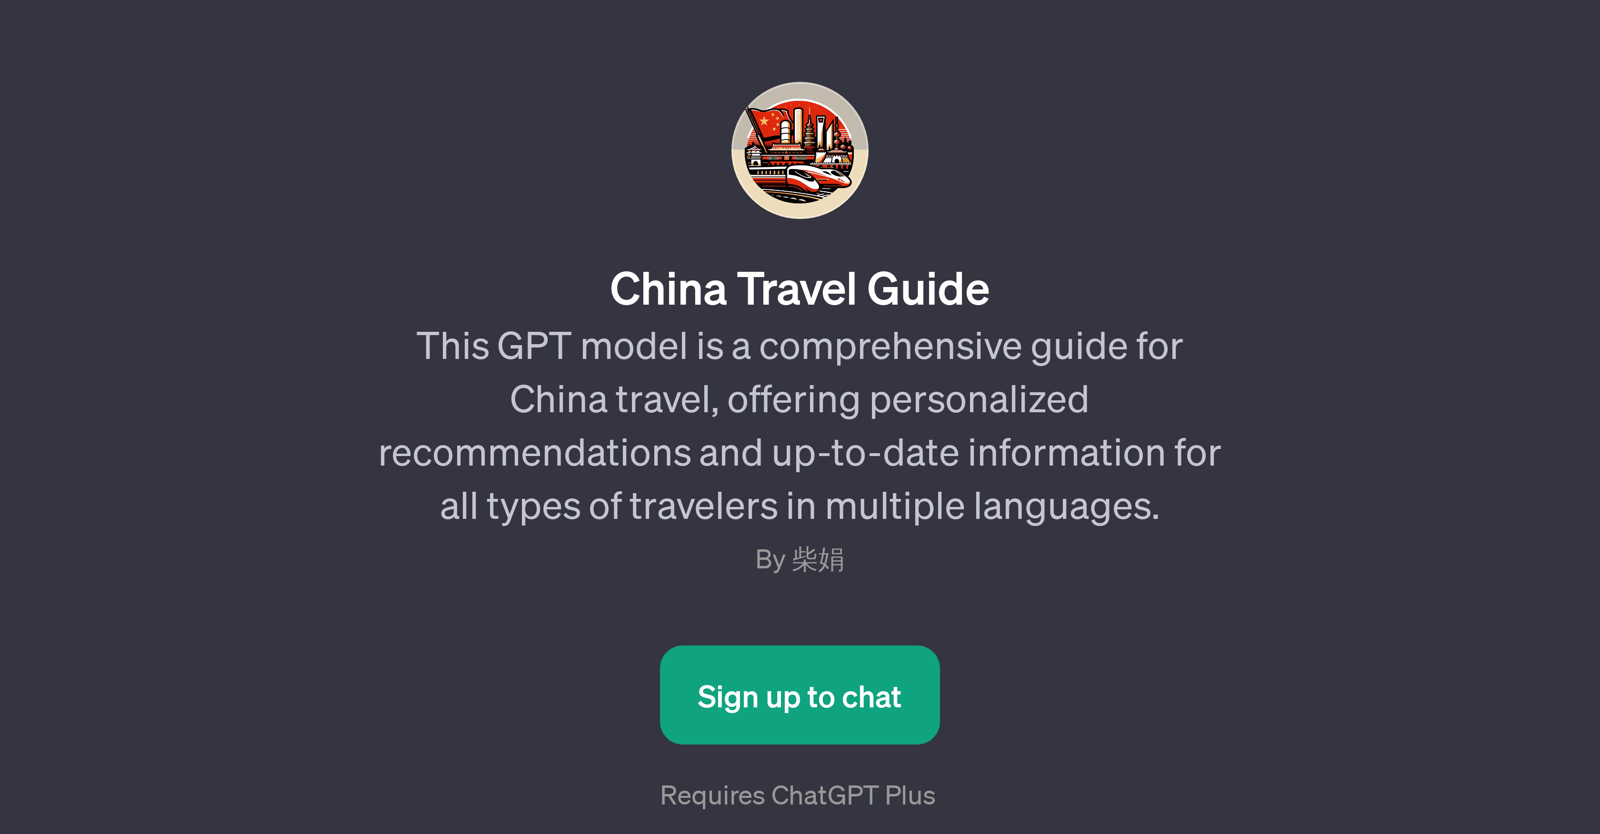 China Travel Guide website